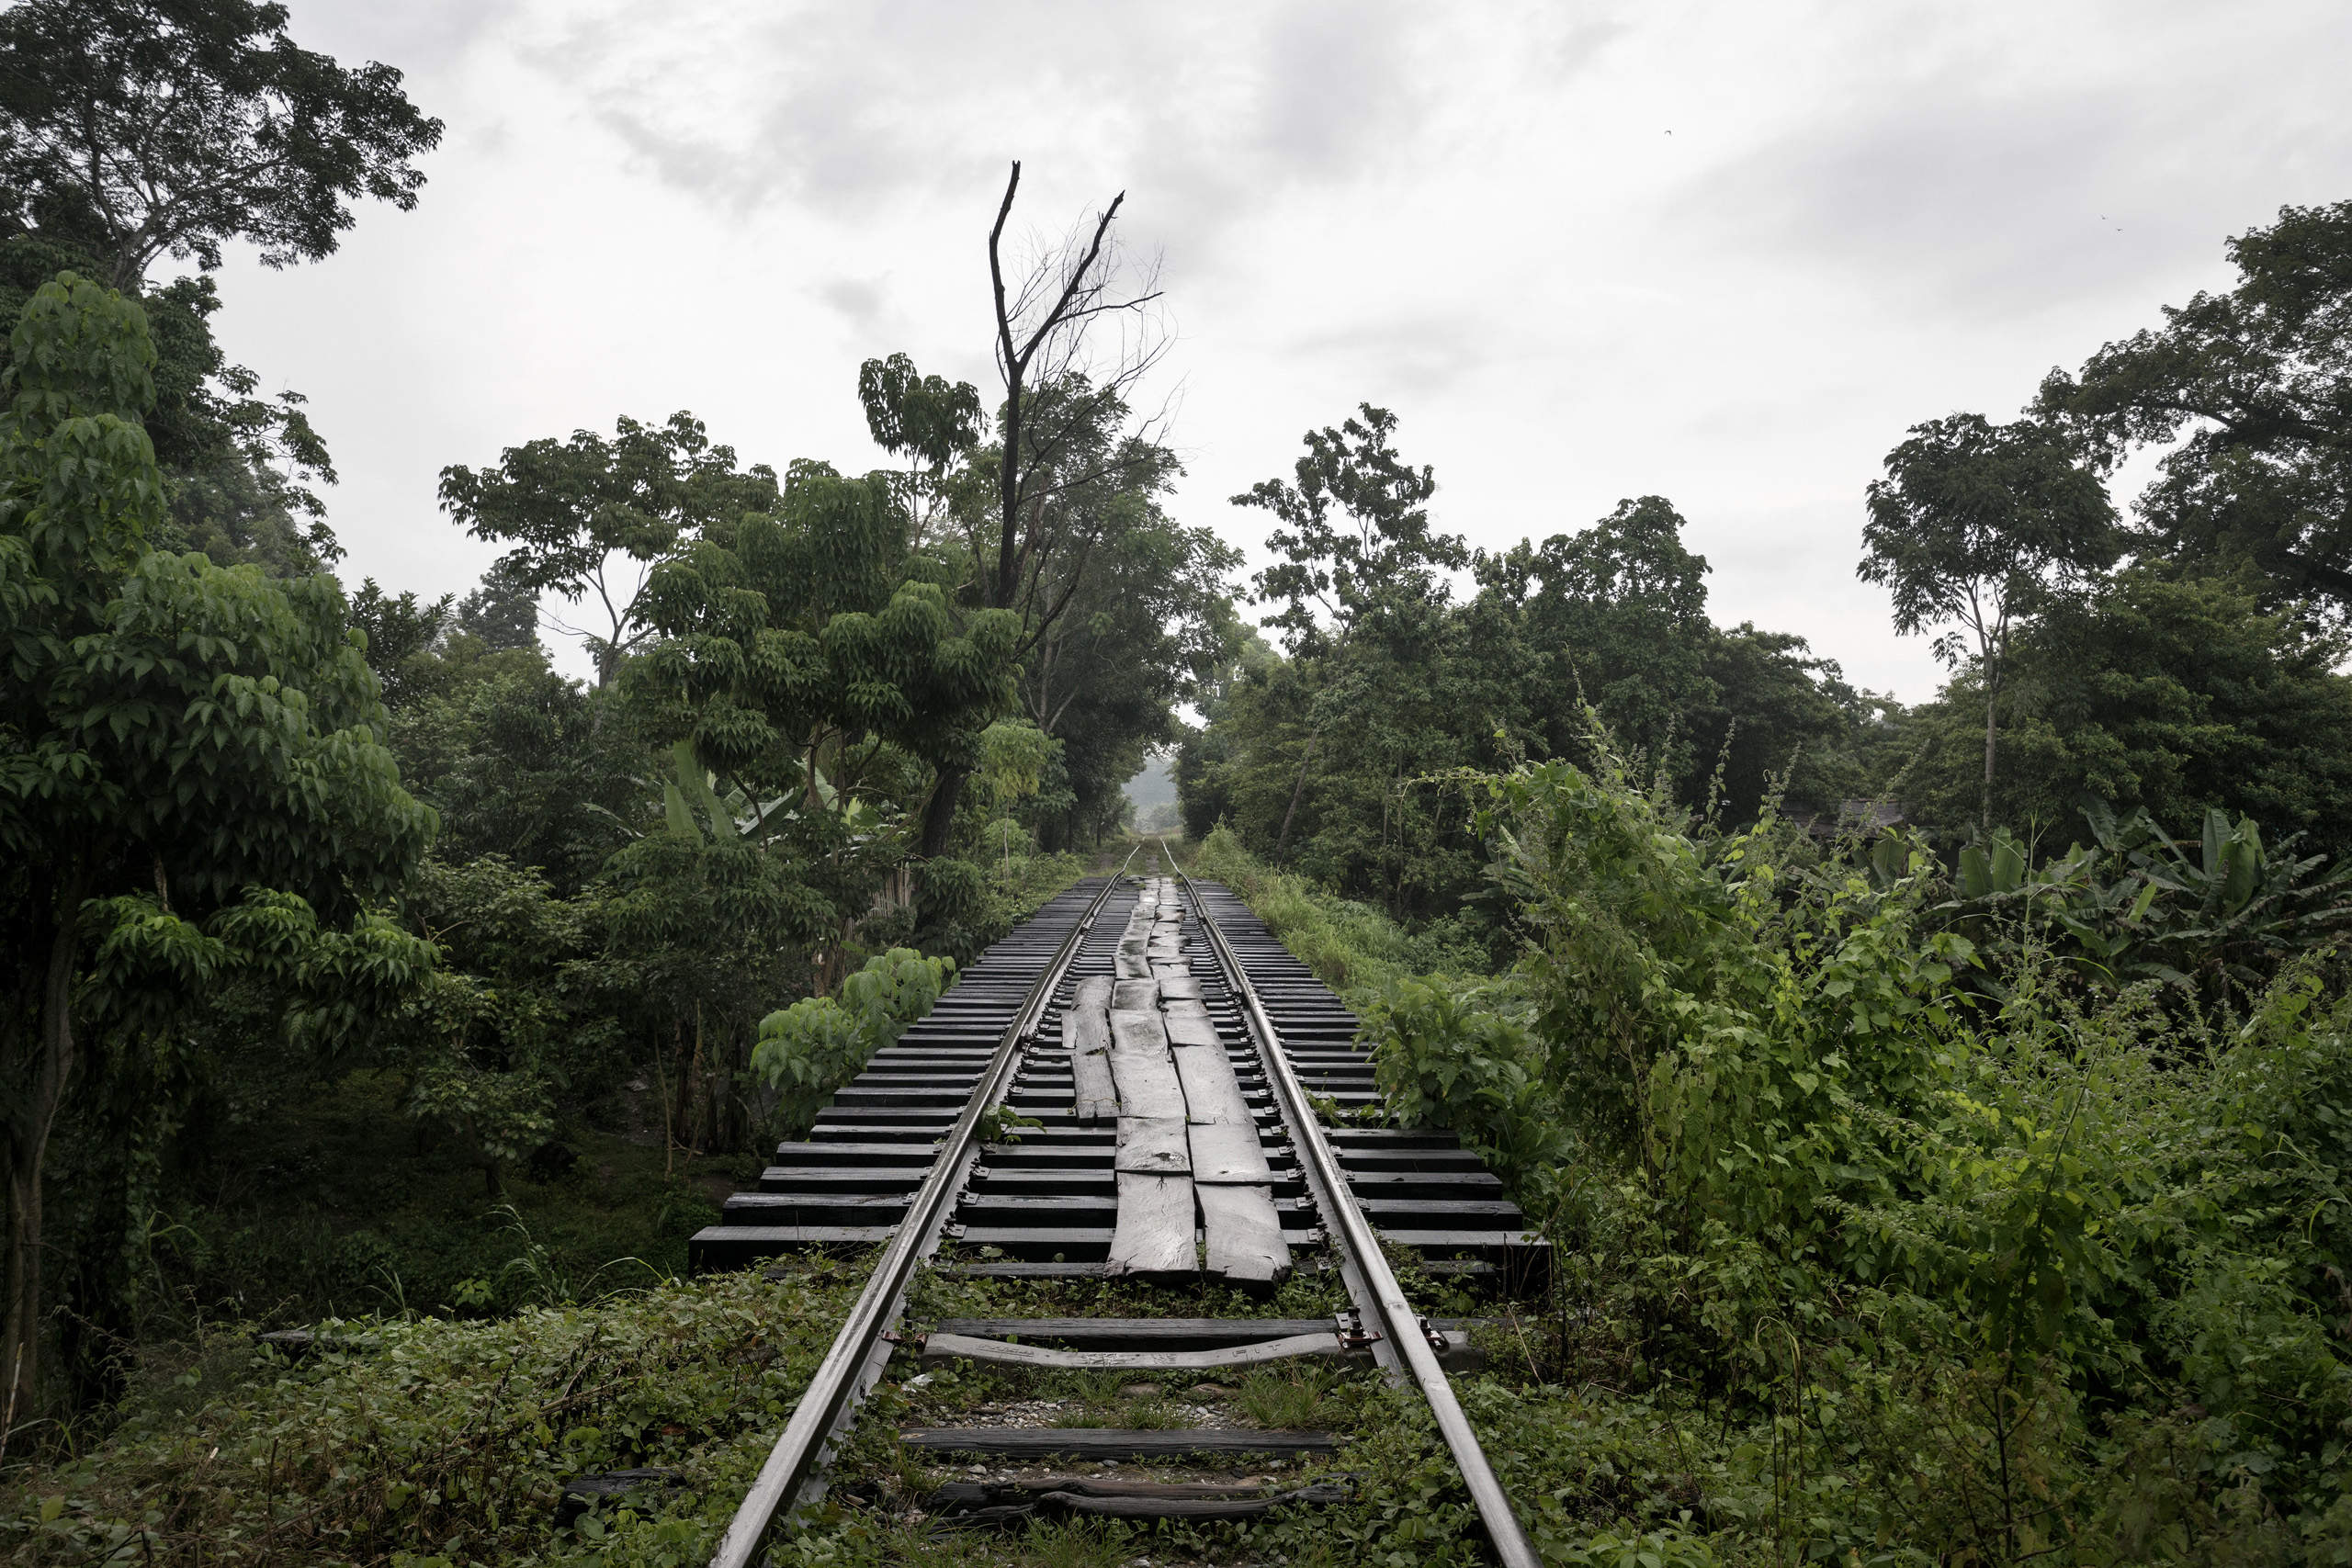 In the outskirts of the Mexican city of Huixtla, in the state of Chiapas, the migrant route that follows the railway tracks and goes from Ciudad Hidalgo, a town on the Mexico / Guatemala border, up to the Mexican city of Ixtepec. Migrants walk on this route for about 400kms until Ixtepec, where they will be able to take the freight train, nicknamed “The Beast” by the migrants because it is extremely dangerous, in order to continue their journey north to the U.S. in a faster way. Chiapas, Mexico. Sept. 25, 2016.